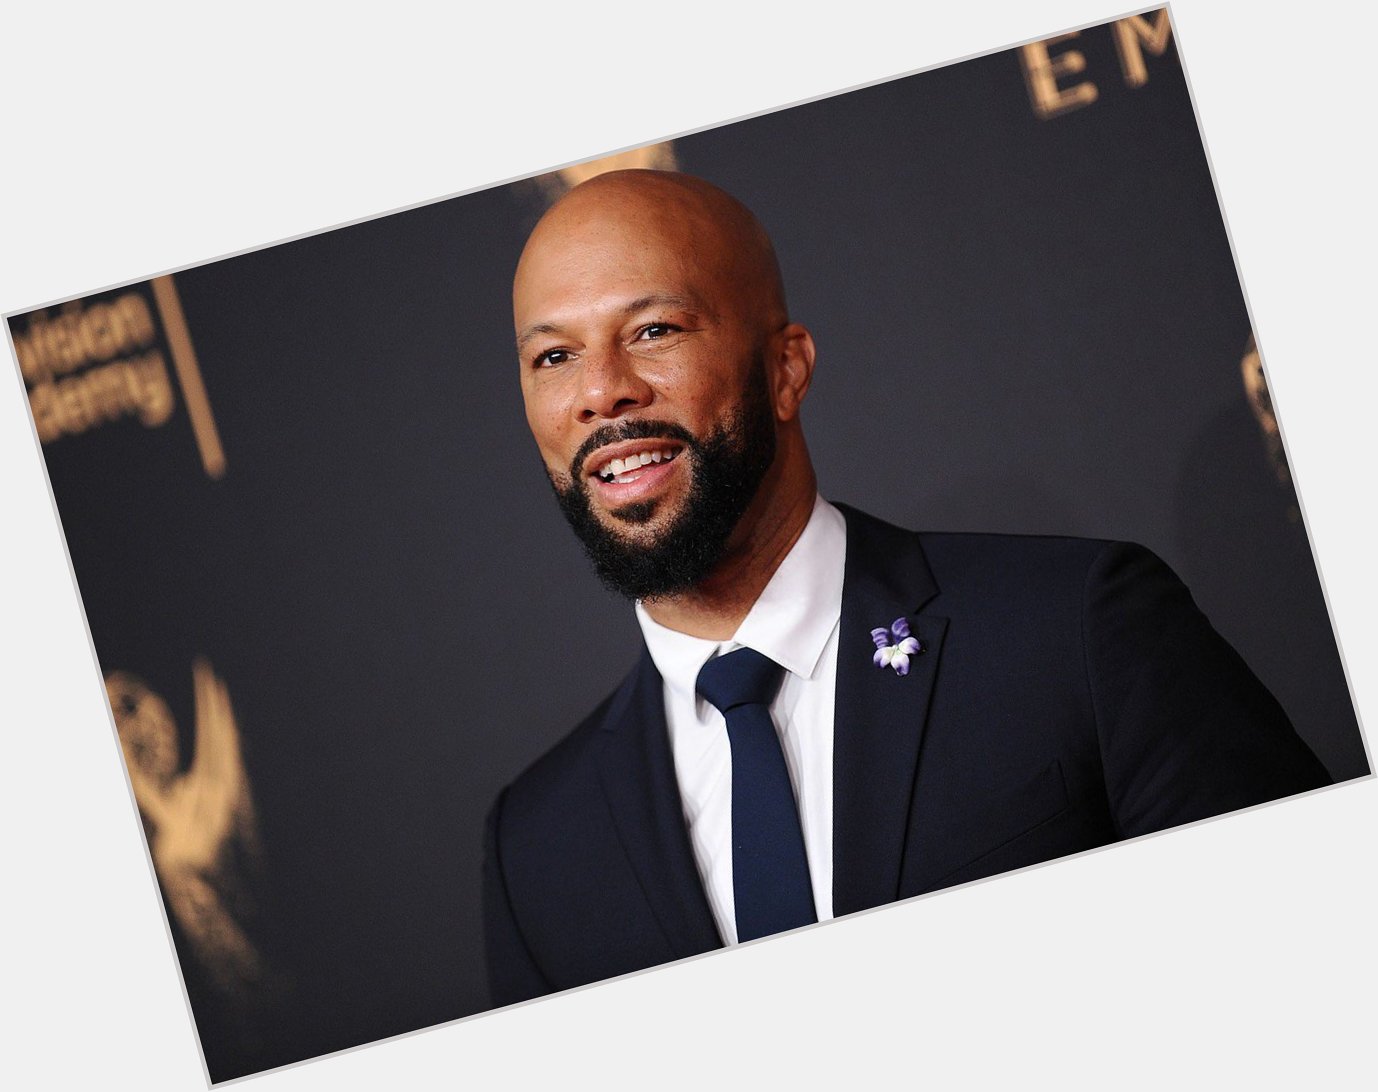 Wishing a Happy 49th Birthday to Common  . What s your fav song/movie role by him?  